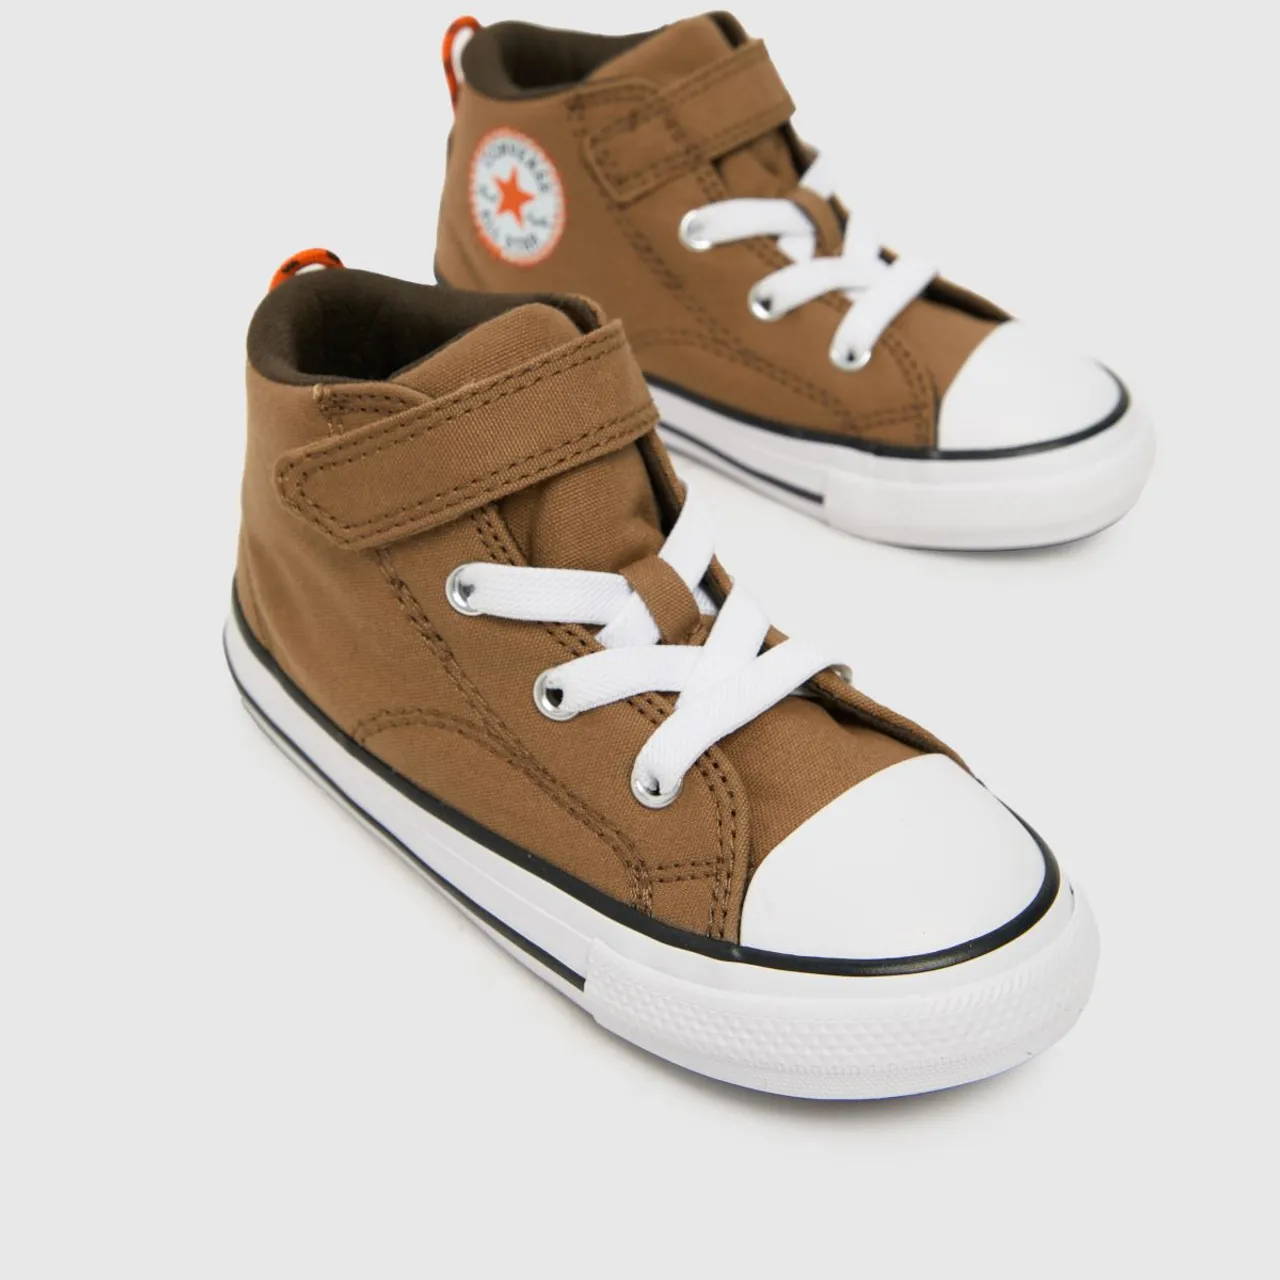 Converse Brown All Star Malden Street V Boys Toddler Trainers